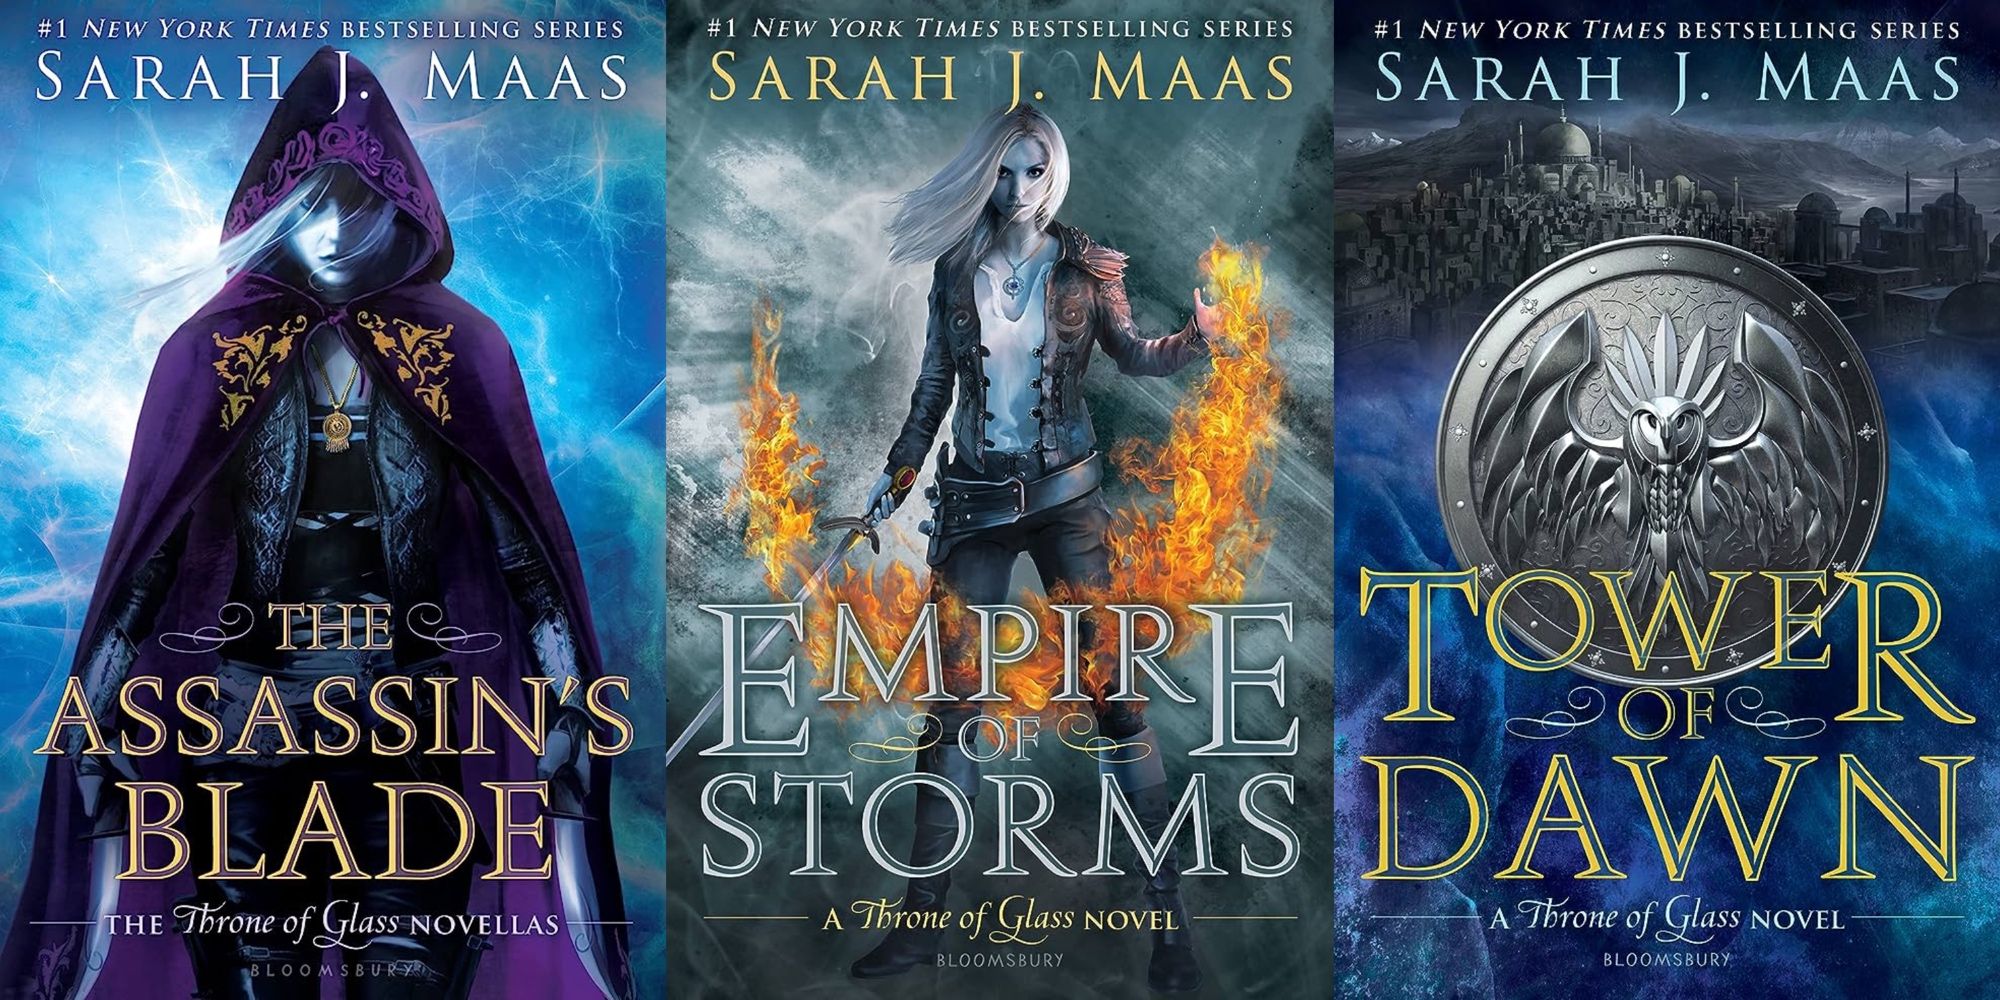 A split image of three books in the Throne of Glass series: The Assassin's Blade, Empire of Storms, and Tower of Dawn